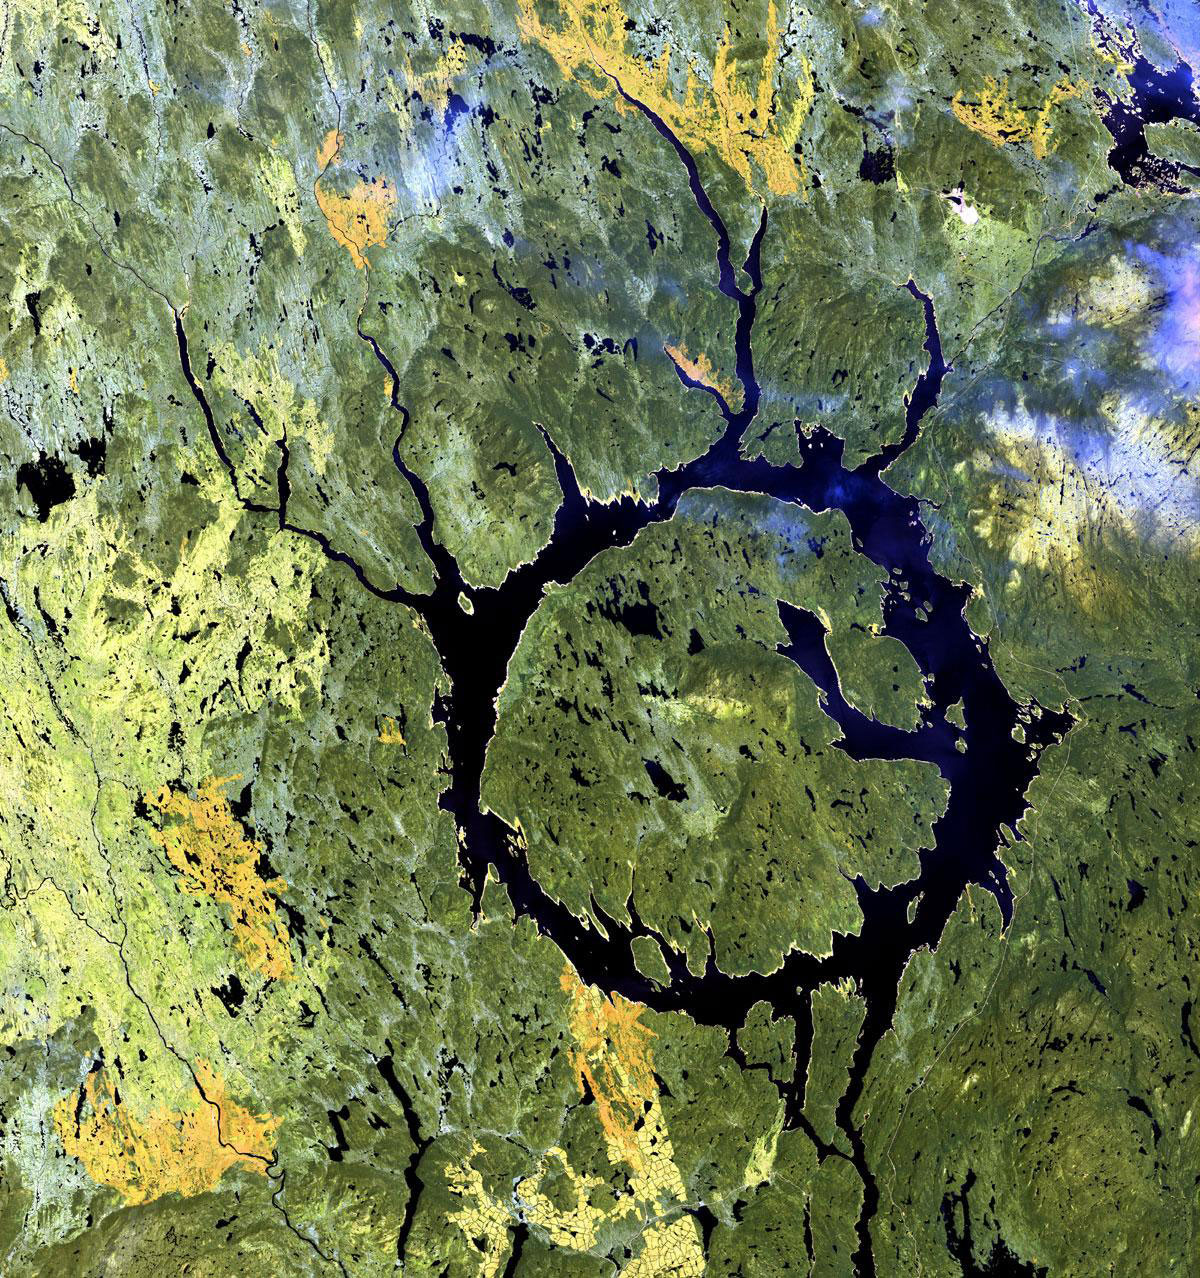 Manicouagan Impact Structure in Quebec. It is roughly 213-215 million years old and has a diameter of approximately 100 km.